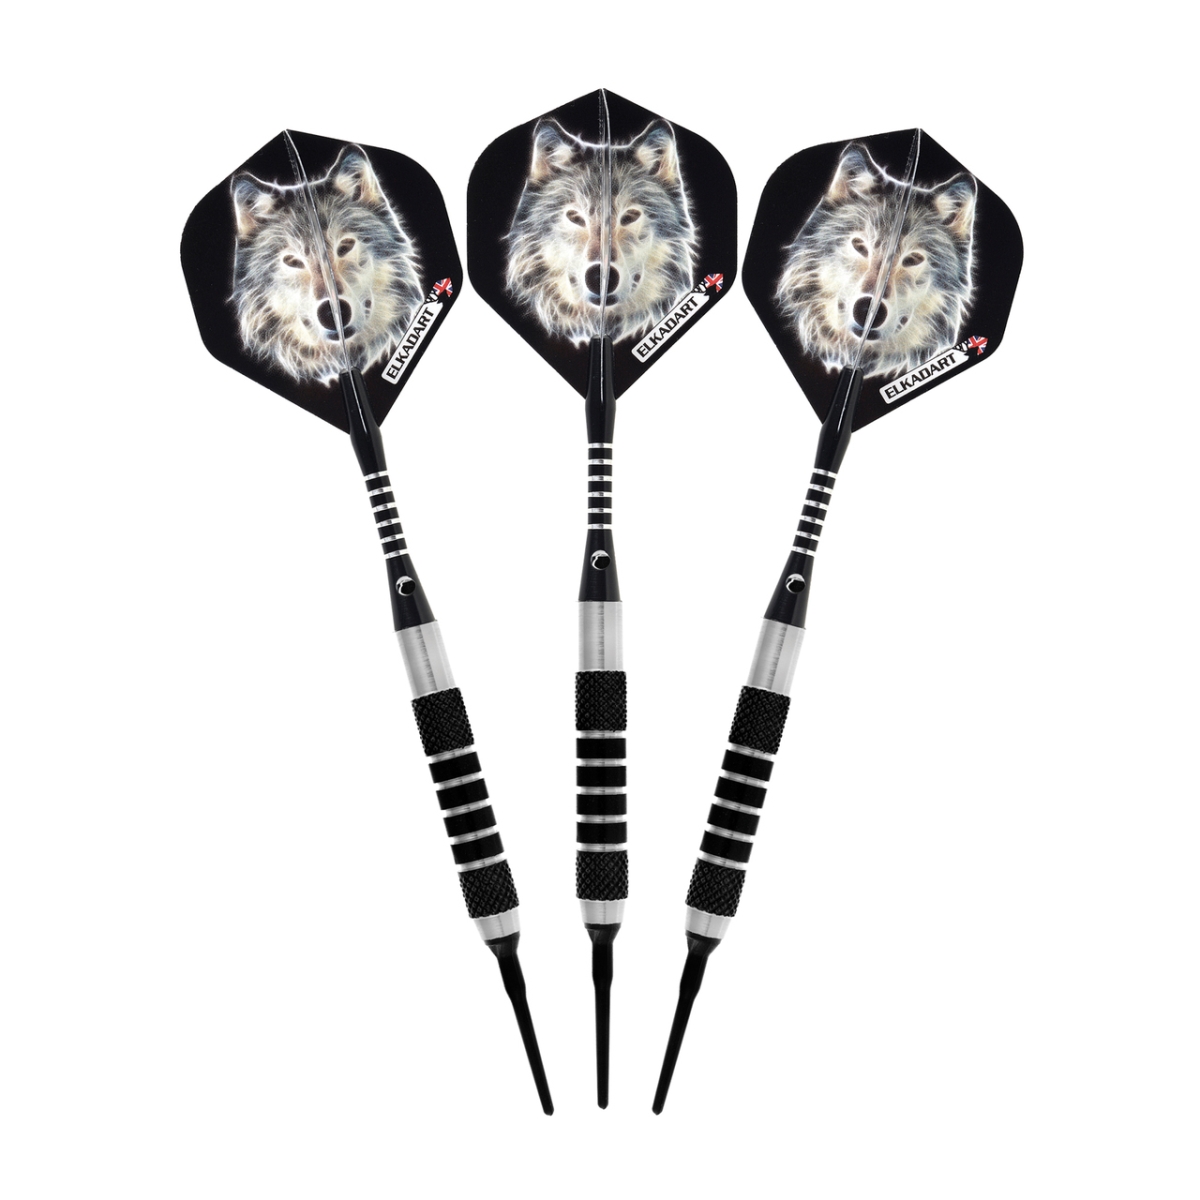 Picture of Elkadart 20-1104-14 Lone Wolf Soft Tip Darts Silver with Black Knurling, 14 g